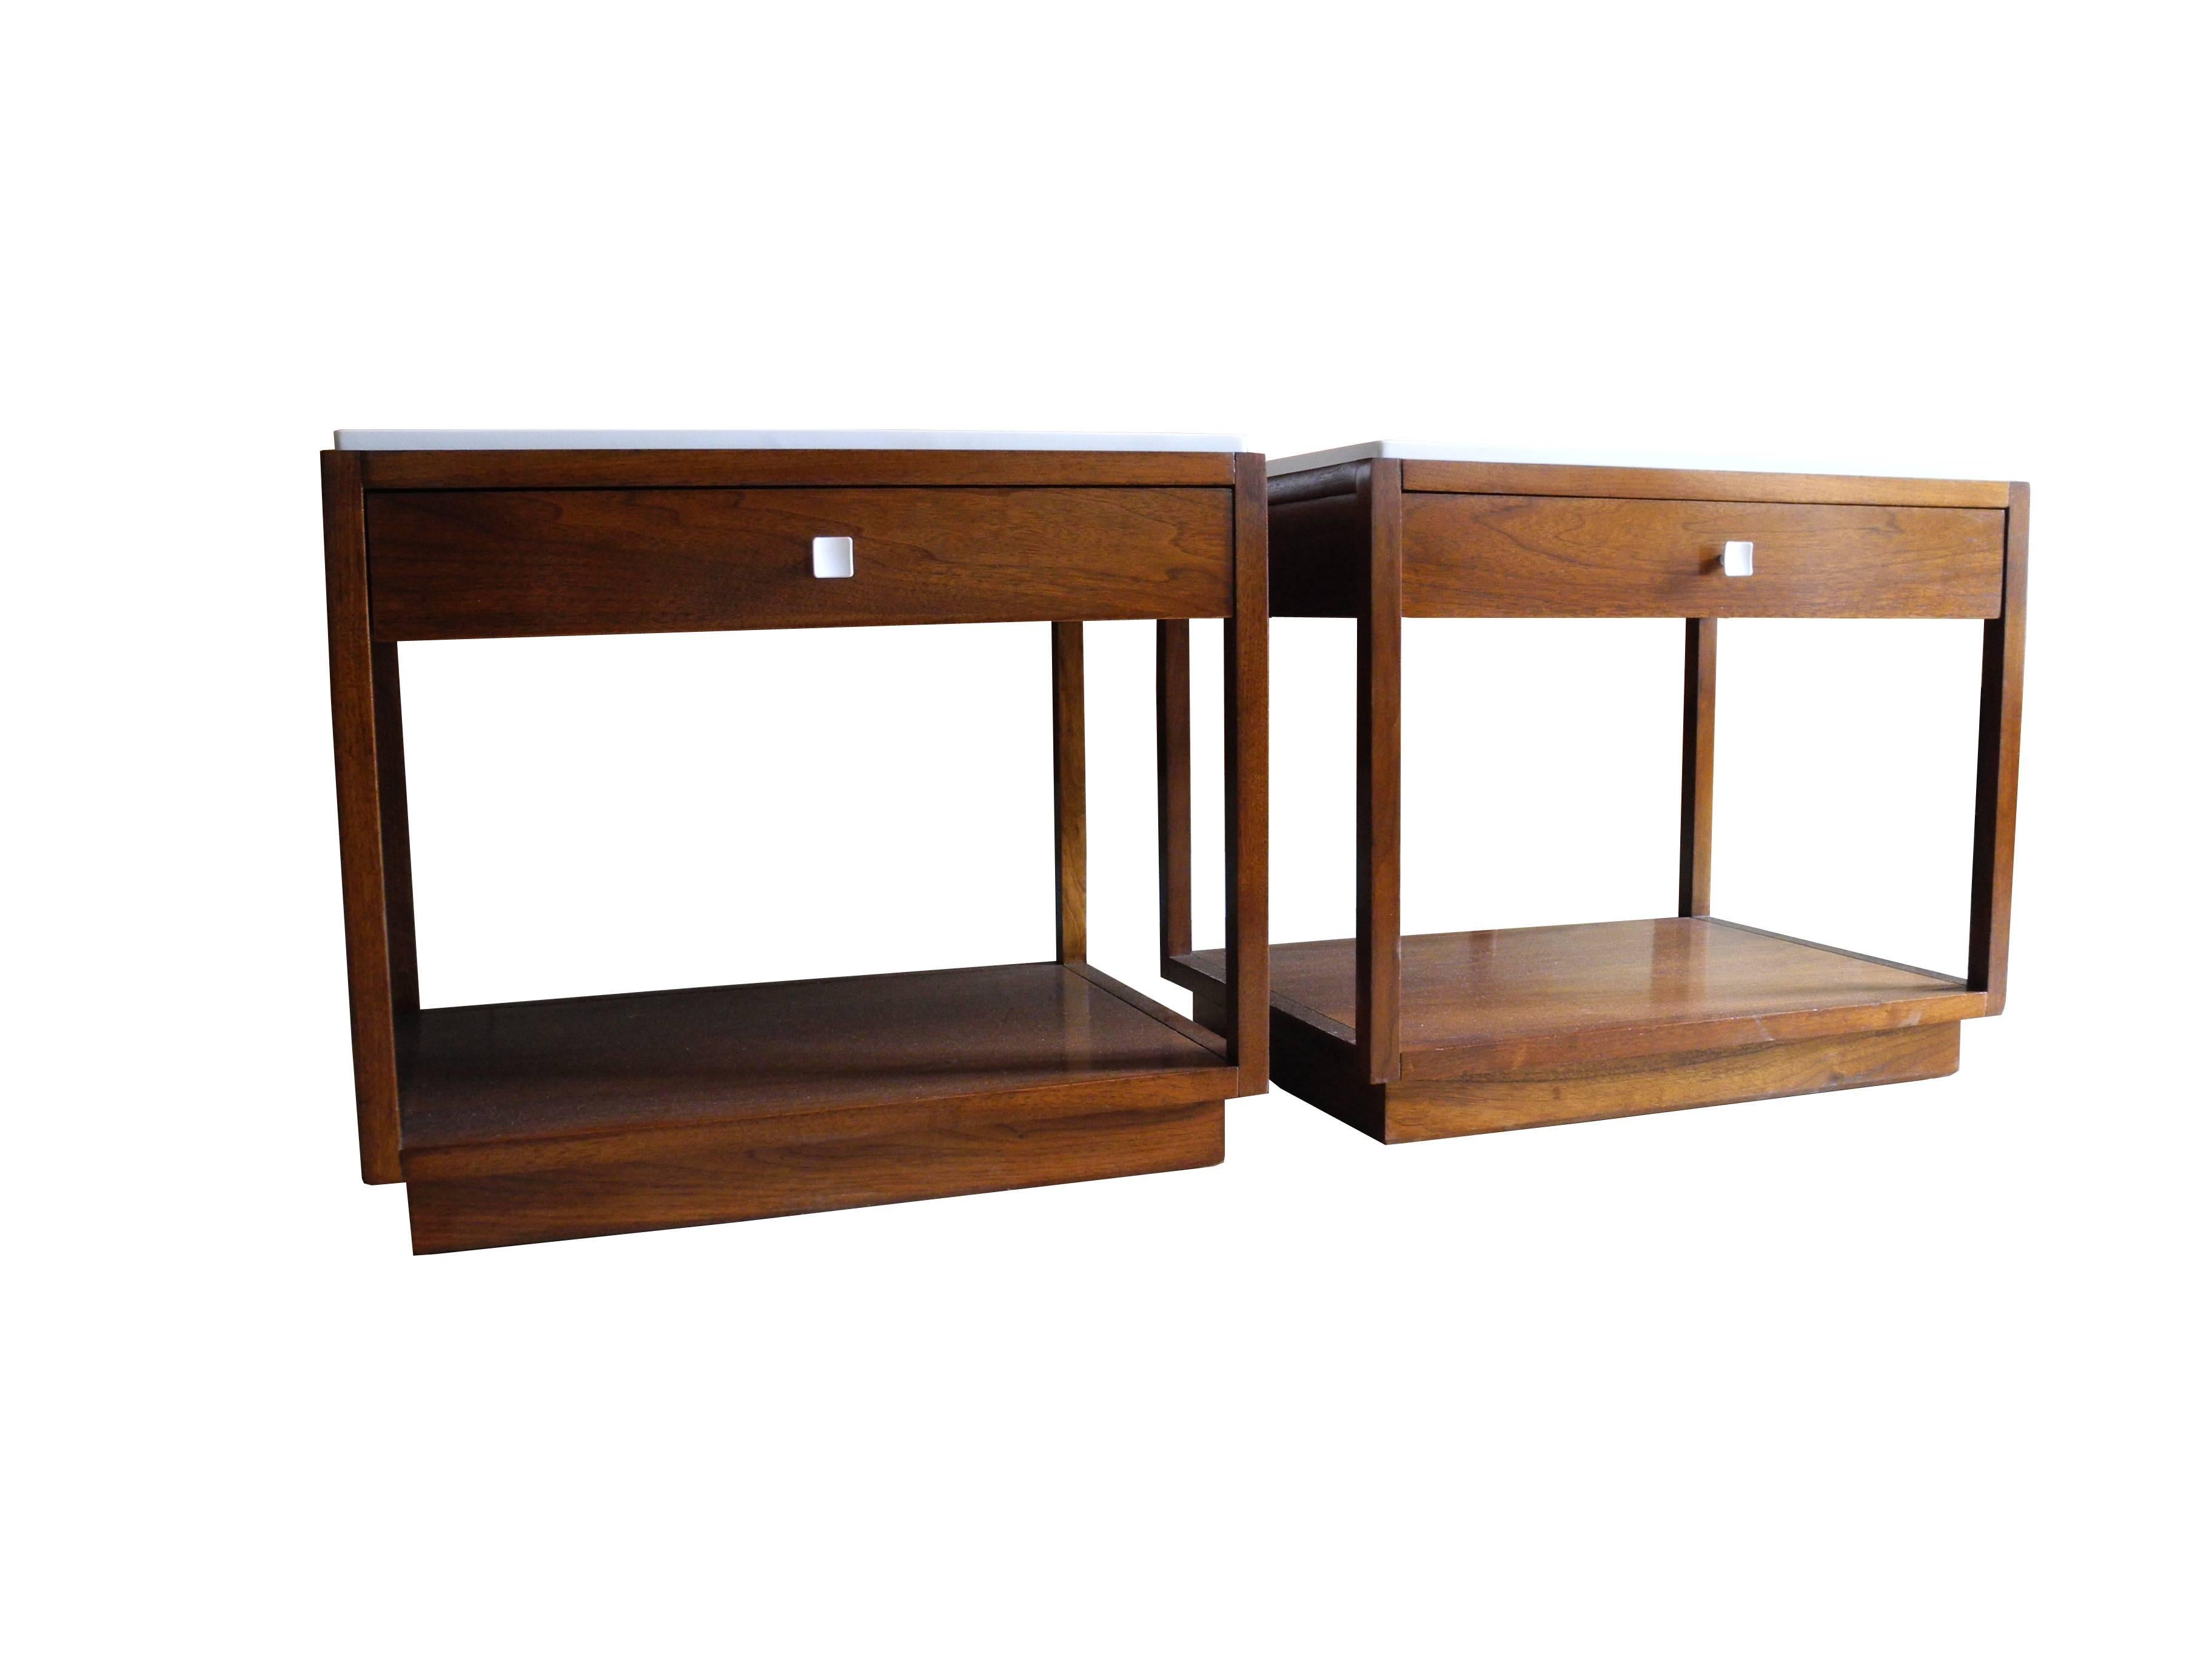 American Mid-Century Modern Pair of Nightstands by Milo Baughman for Directional